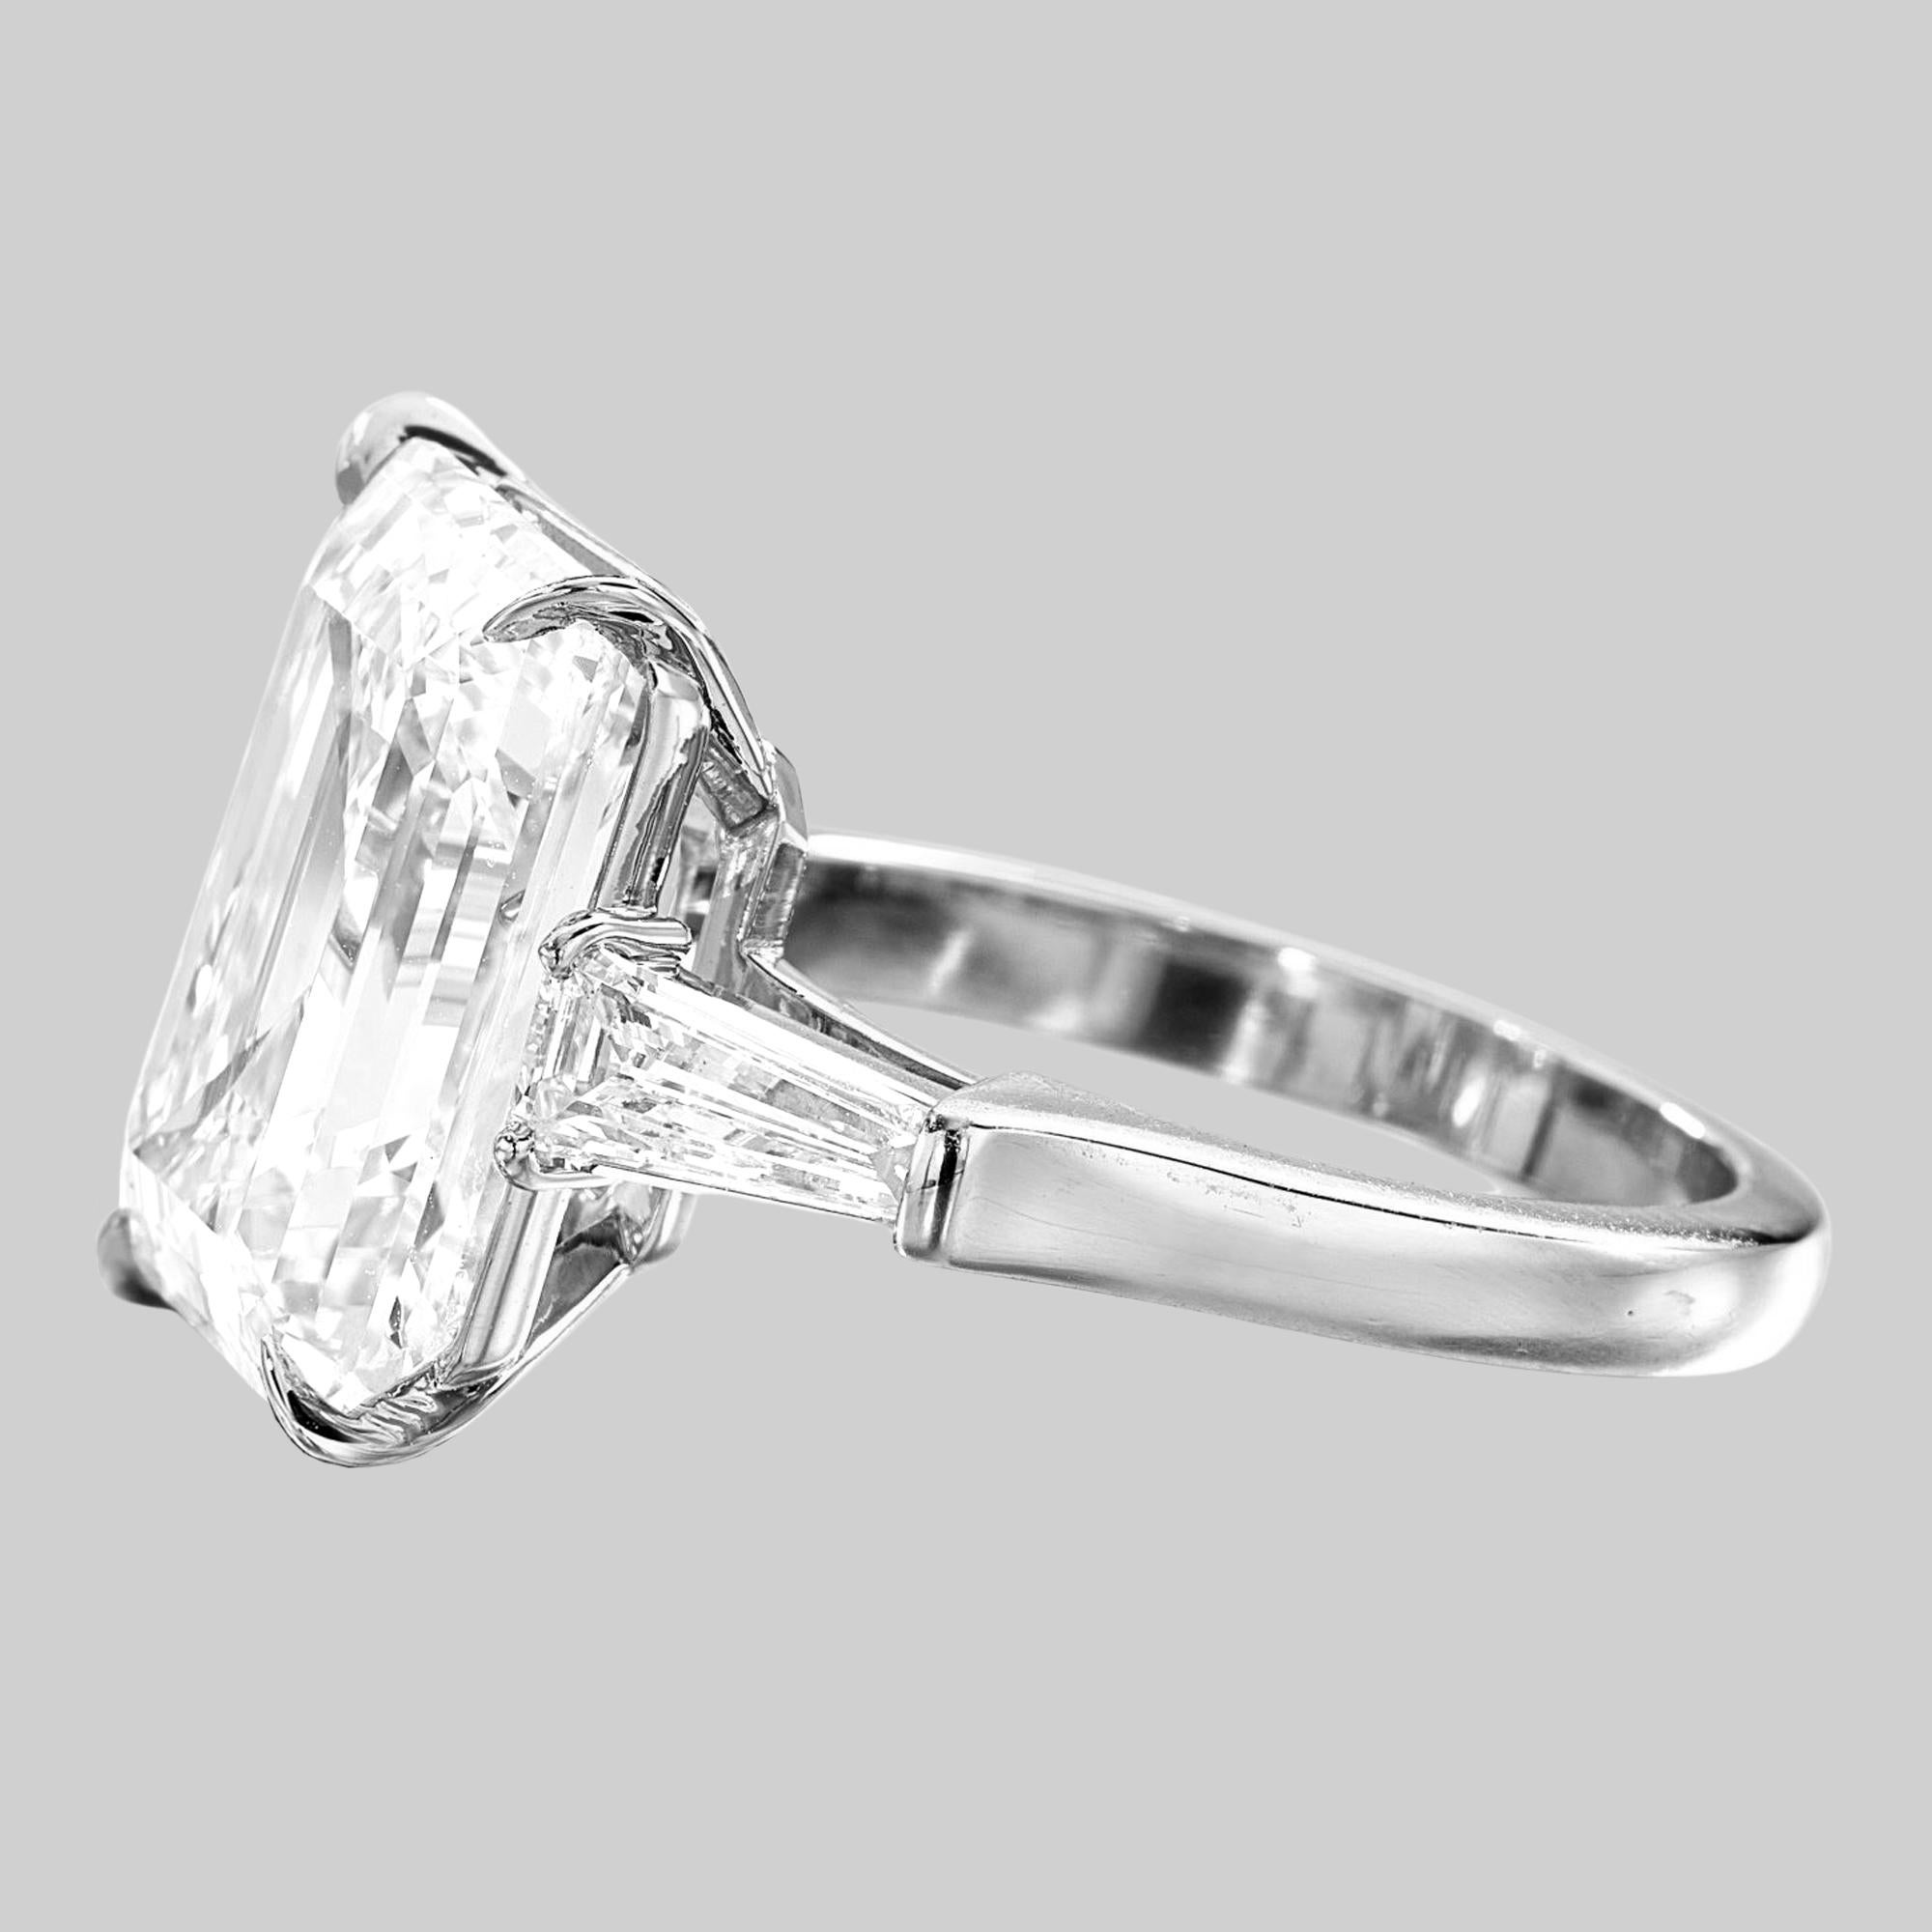 3 carat emerald cut diamond ring that will leave you utterly speechless.

Prepare to be dazzled by the unparalleled beauty of this extraordinary gemstone, boasting an impressive F color and VS2 clarity, certified by the prestigious Gemological